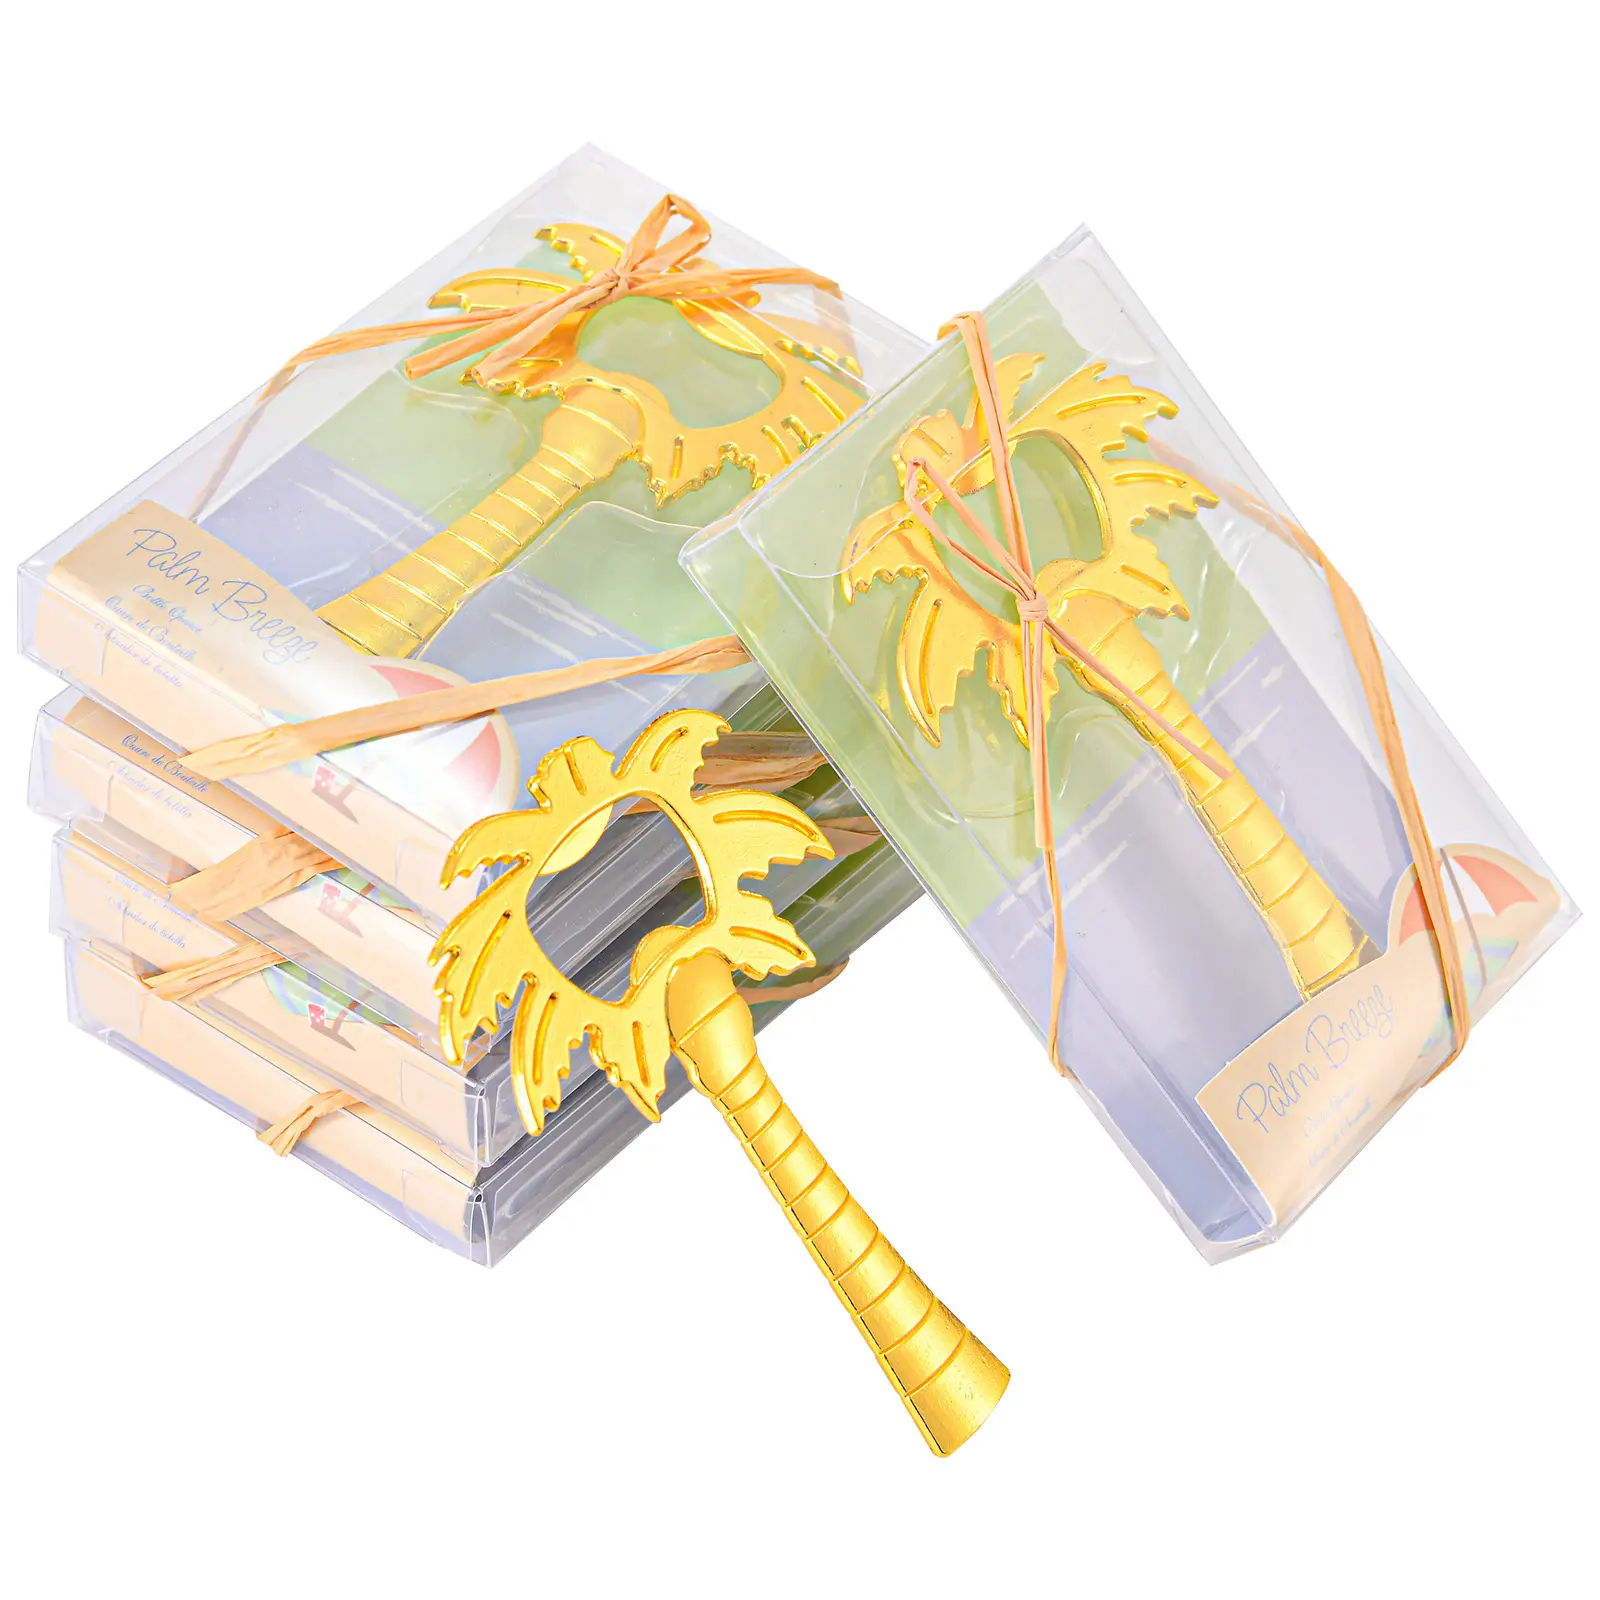 coconut tree shaped beer bottle opener beach wedding party favors gift souvenirs for guests